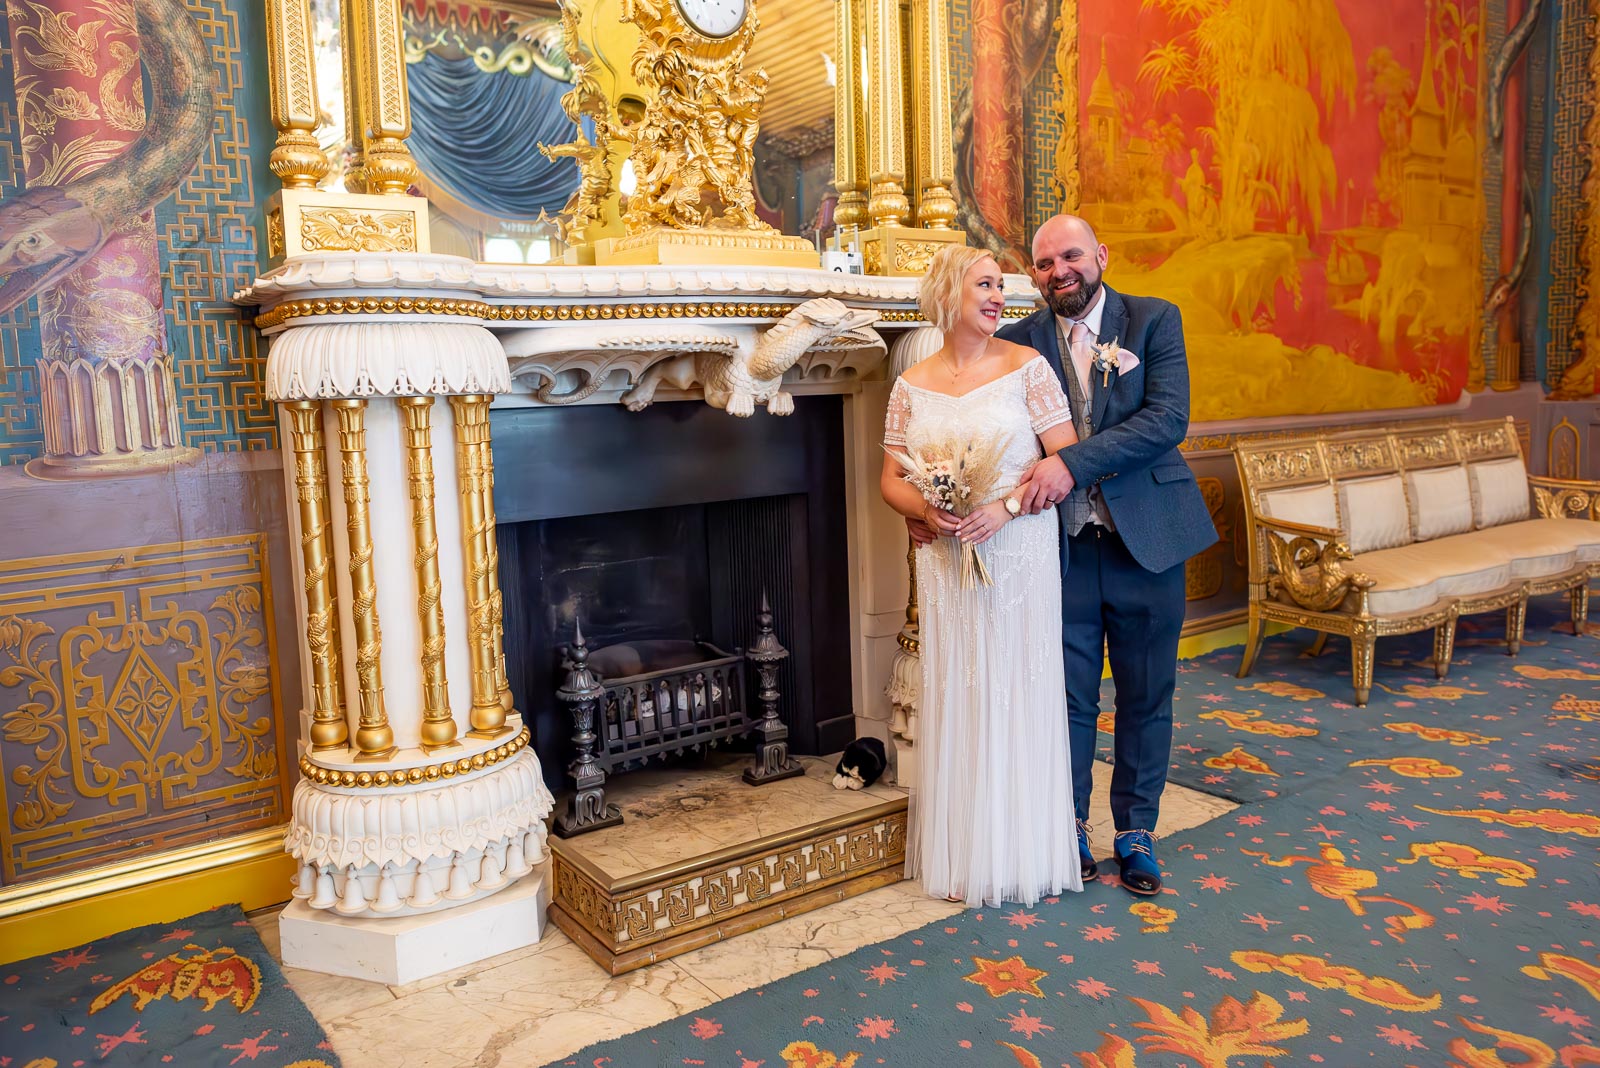 Georgina and Andy smile at each other on front of the ornate fireplace in The Music Room at Brighton Royal Pavilion.